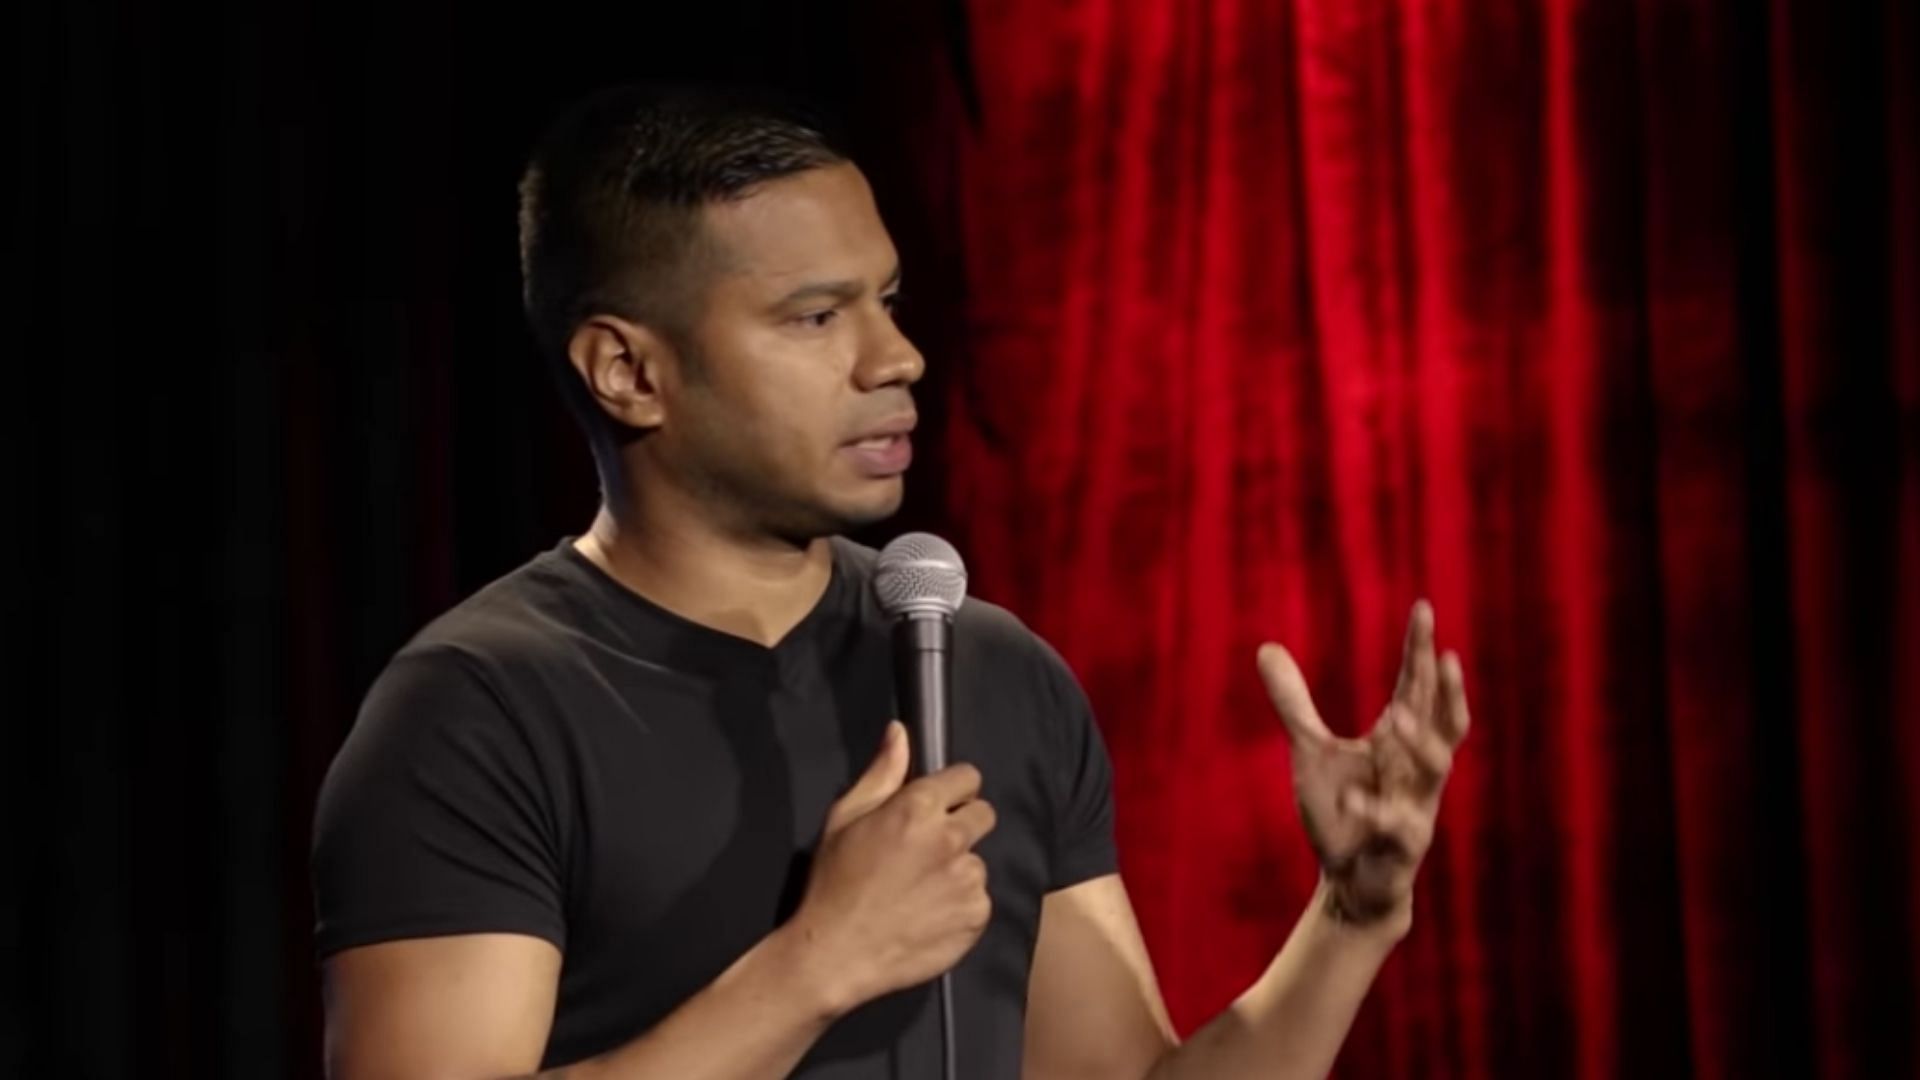 Daniel Fernandes examines his own journey with mental health in his stand-up special ‘Shadows’.